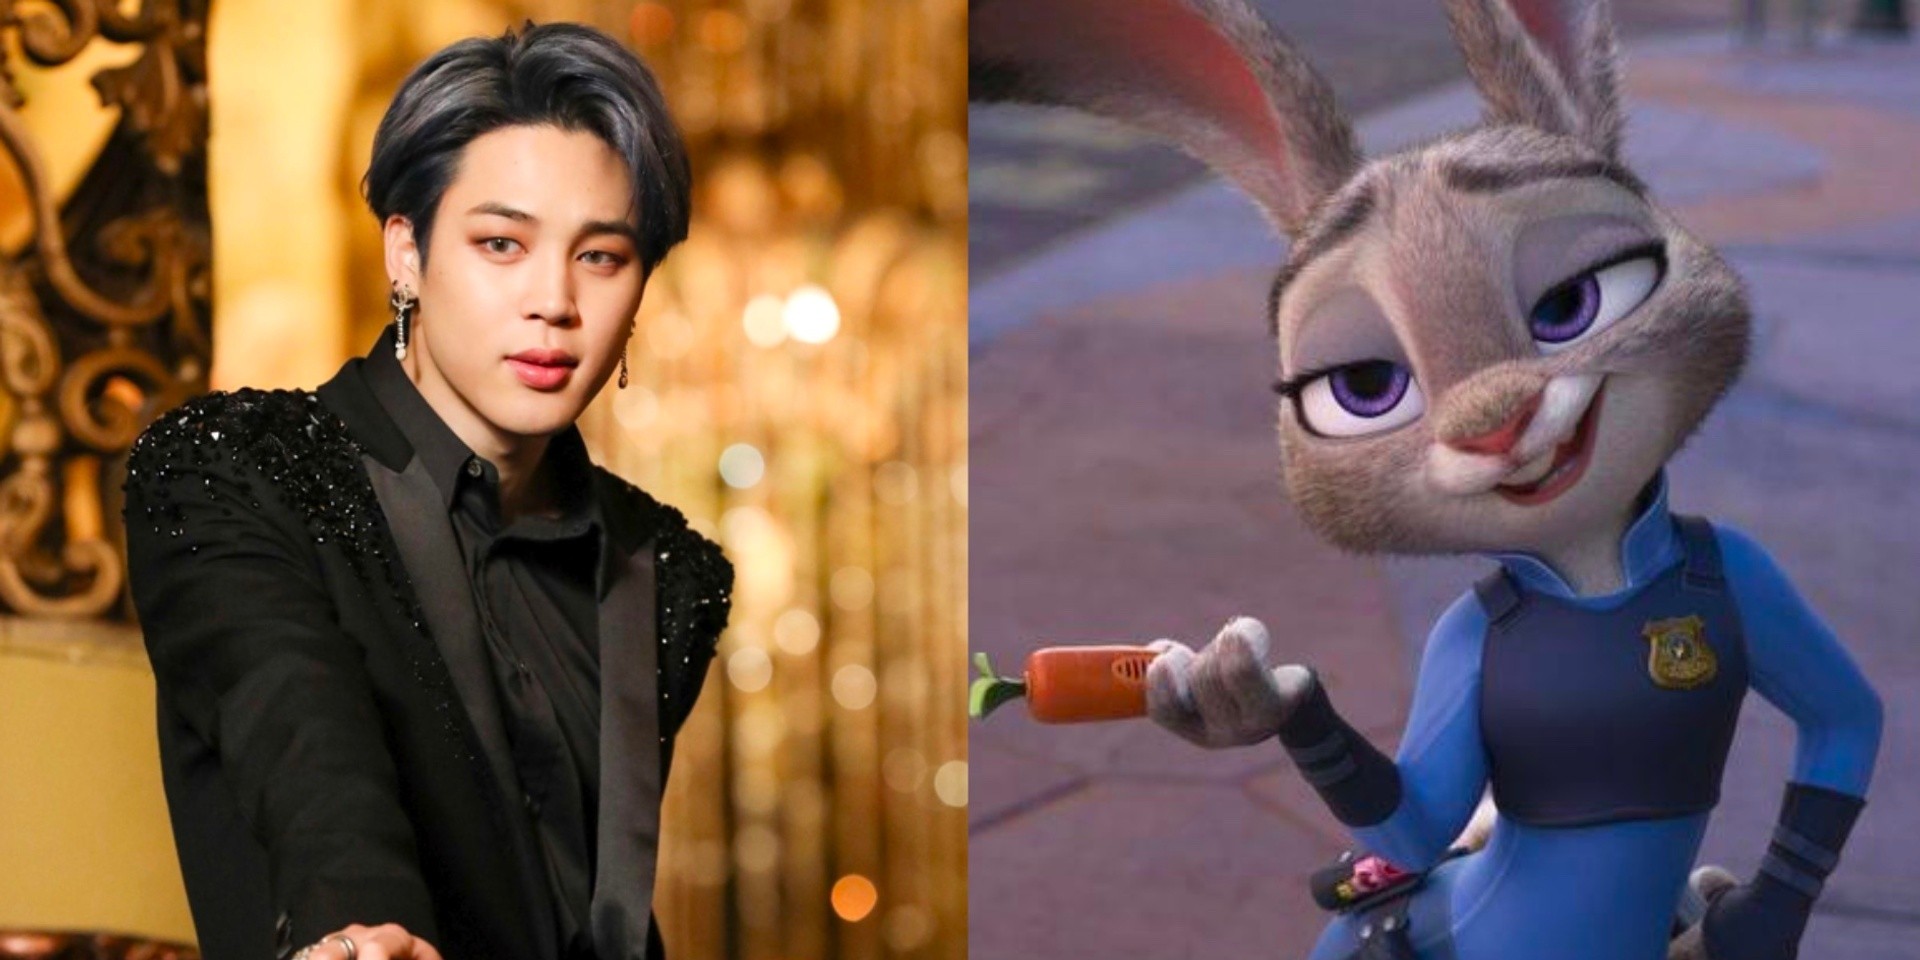 "When can we...work together?!": Zootopia's co-director Jared Bush on BTS Jimin's impressive dubbing of Judy